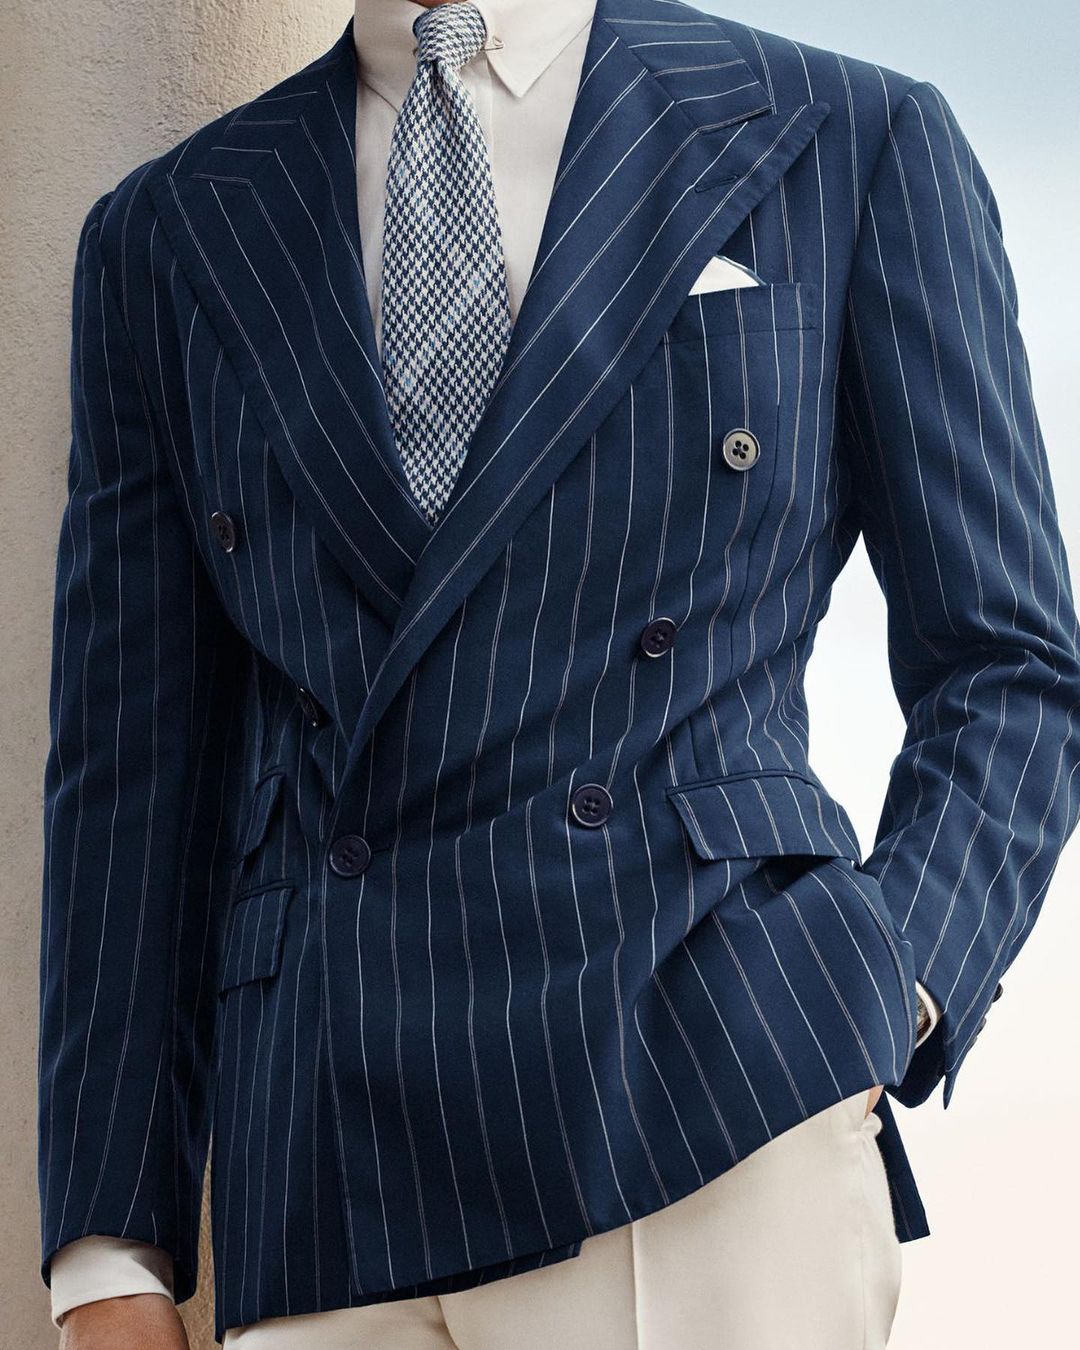 5 Suit Shopping Mistakes Every Man Must Avoid